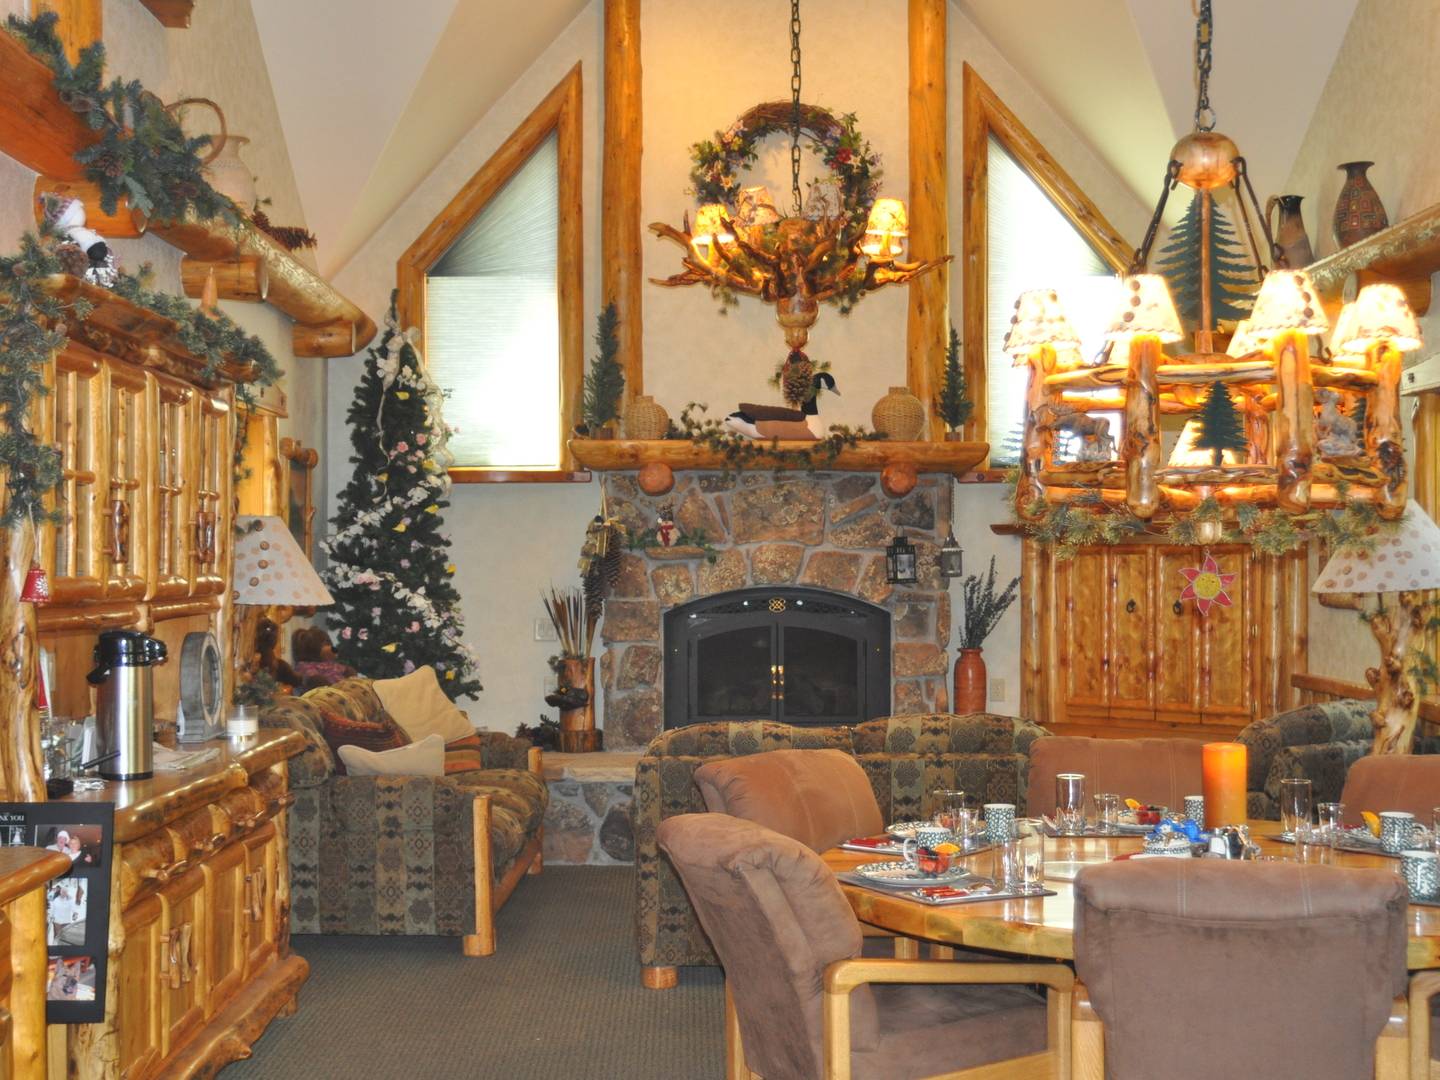 Estes Park Bed and Breakfast